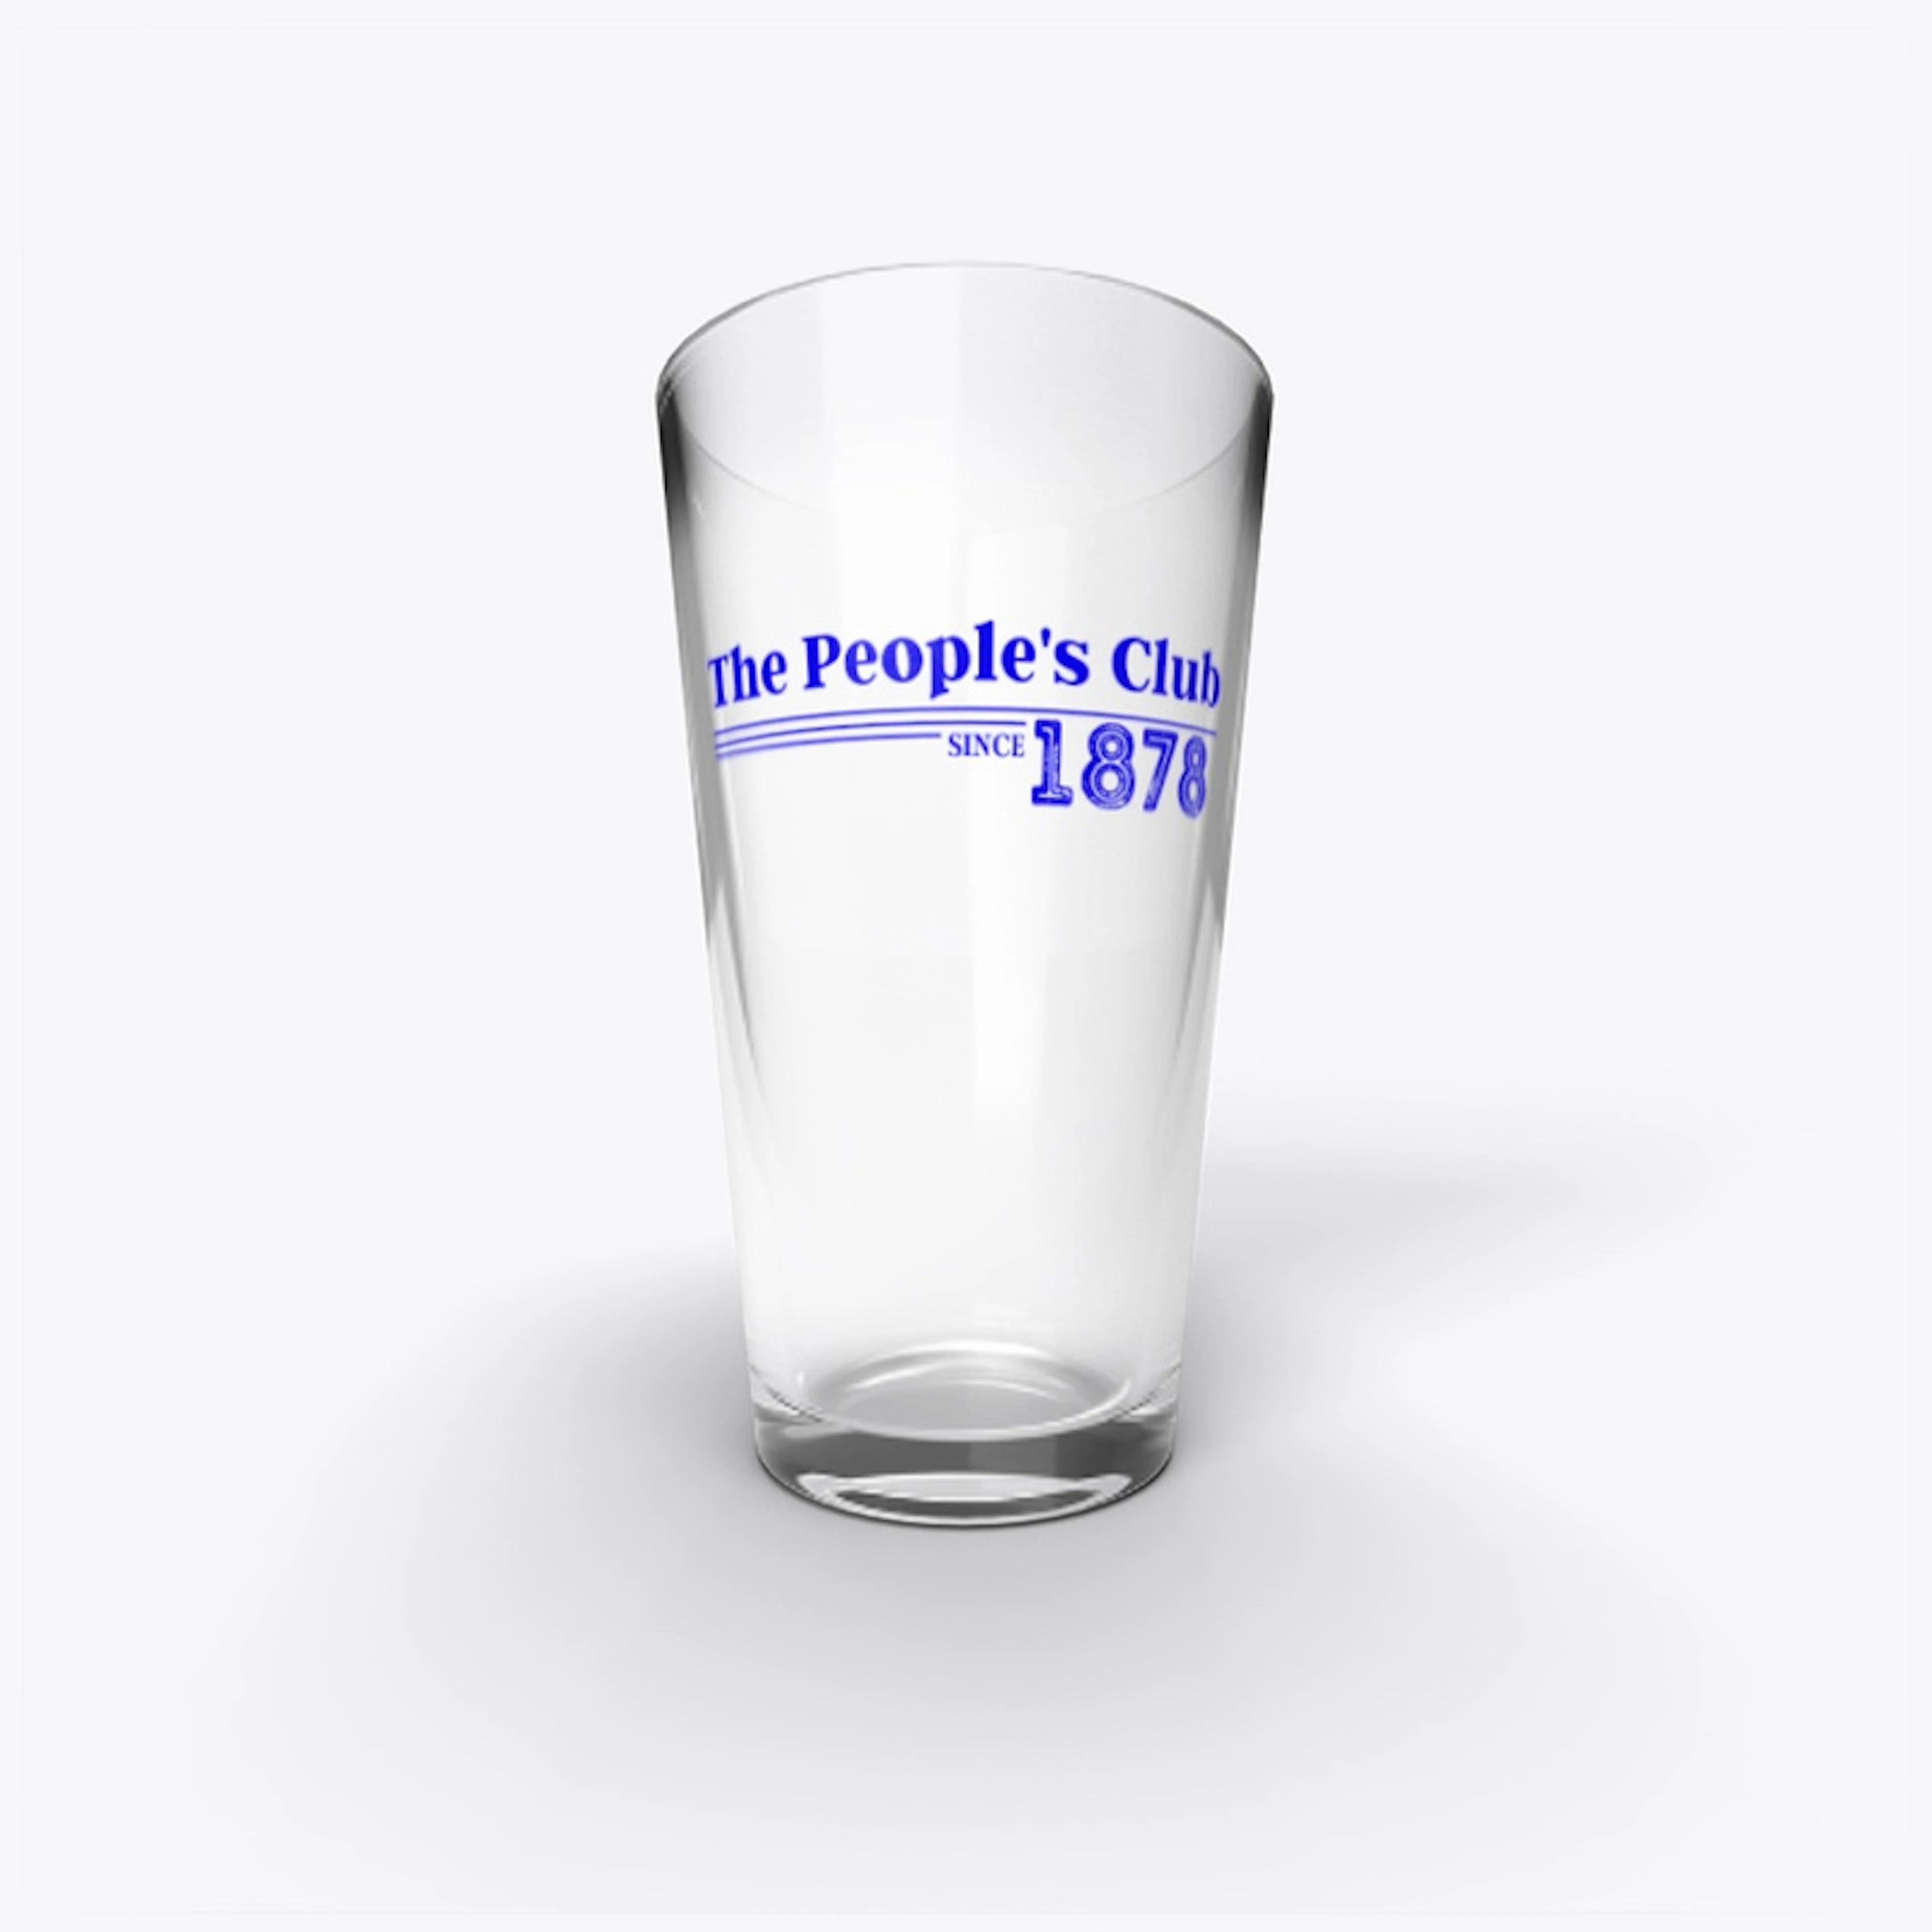 Everton - the People's Club